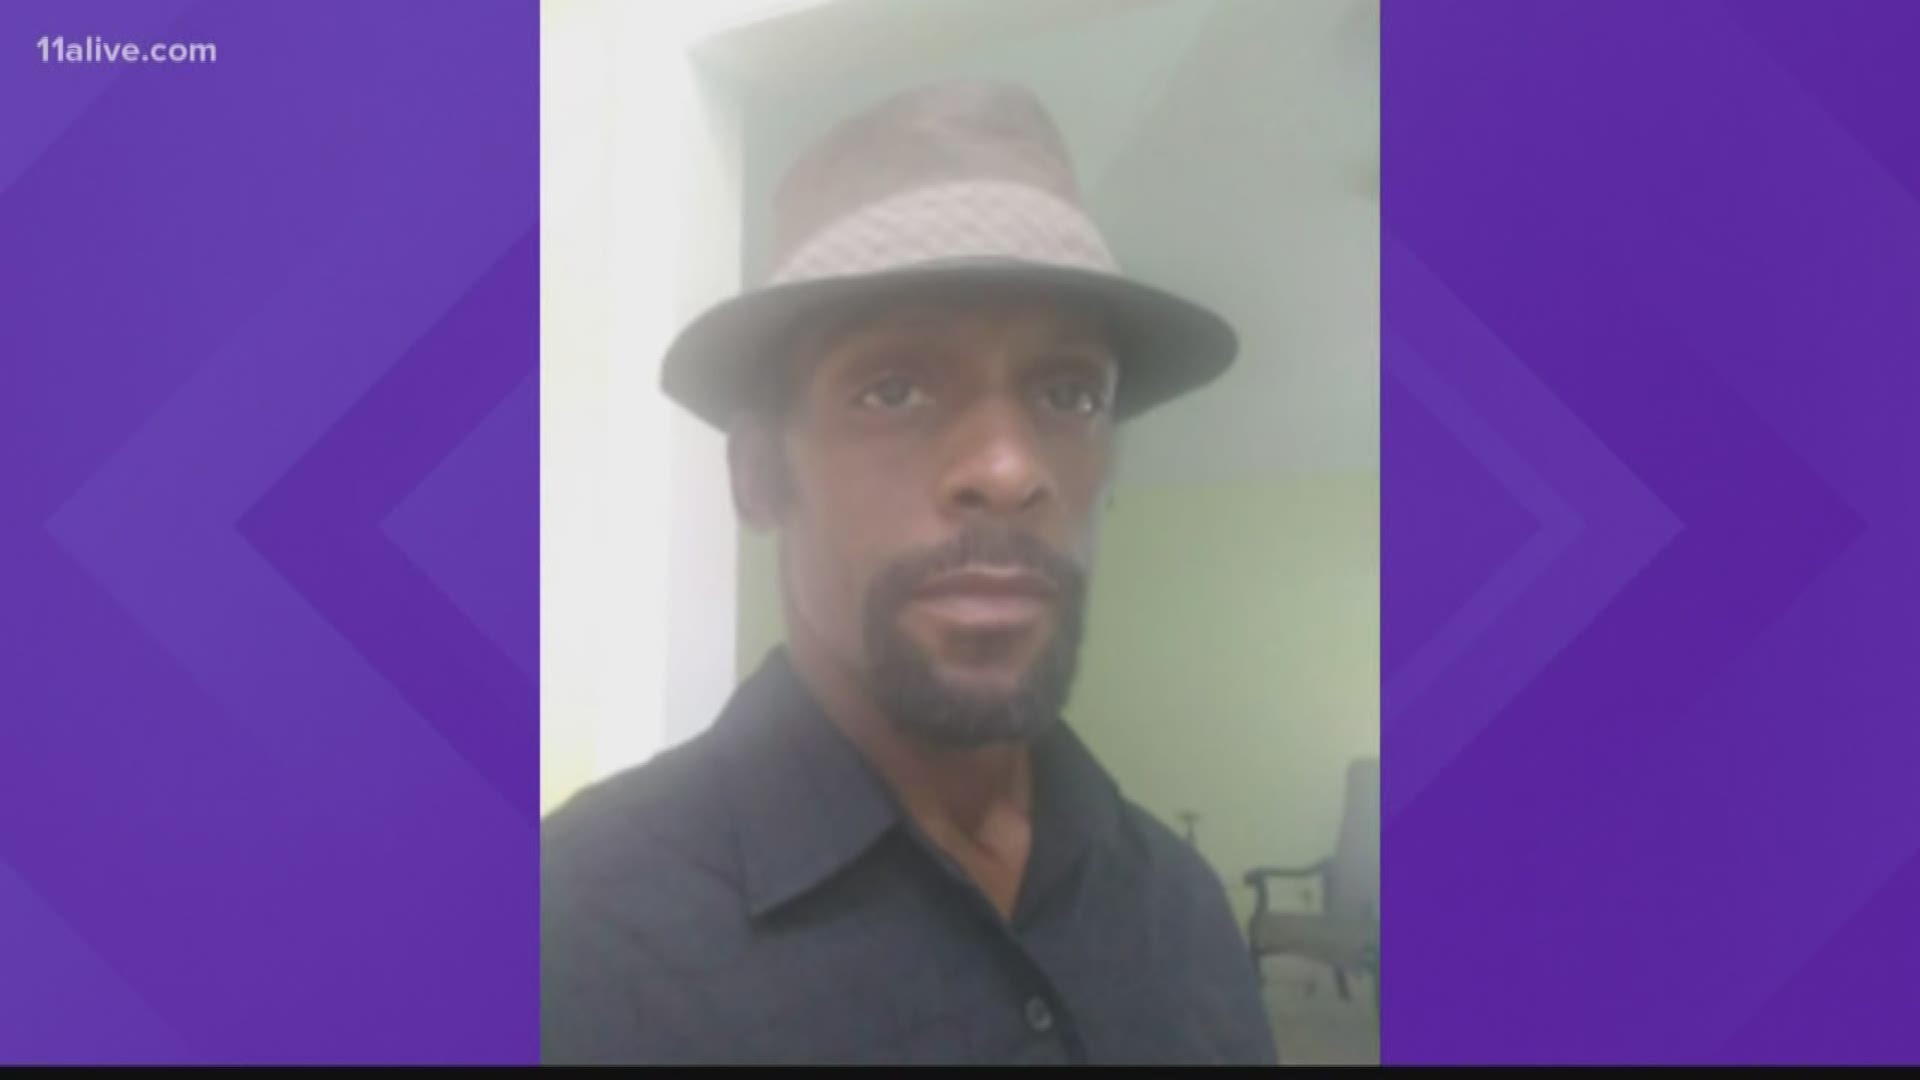 Jay Pritchett was last seen getting into a white car Monday evening. His family says he has difficulty breathing, especially in the cold weather.